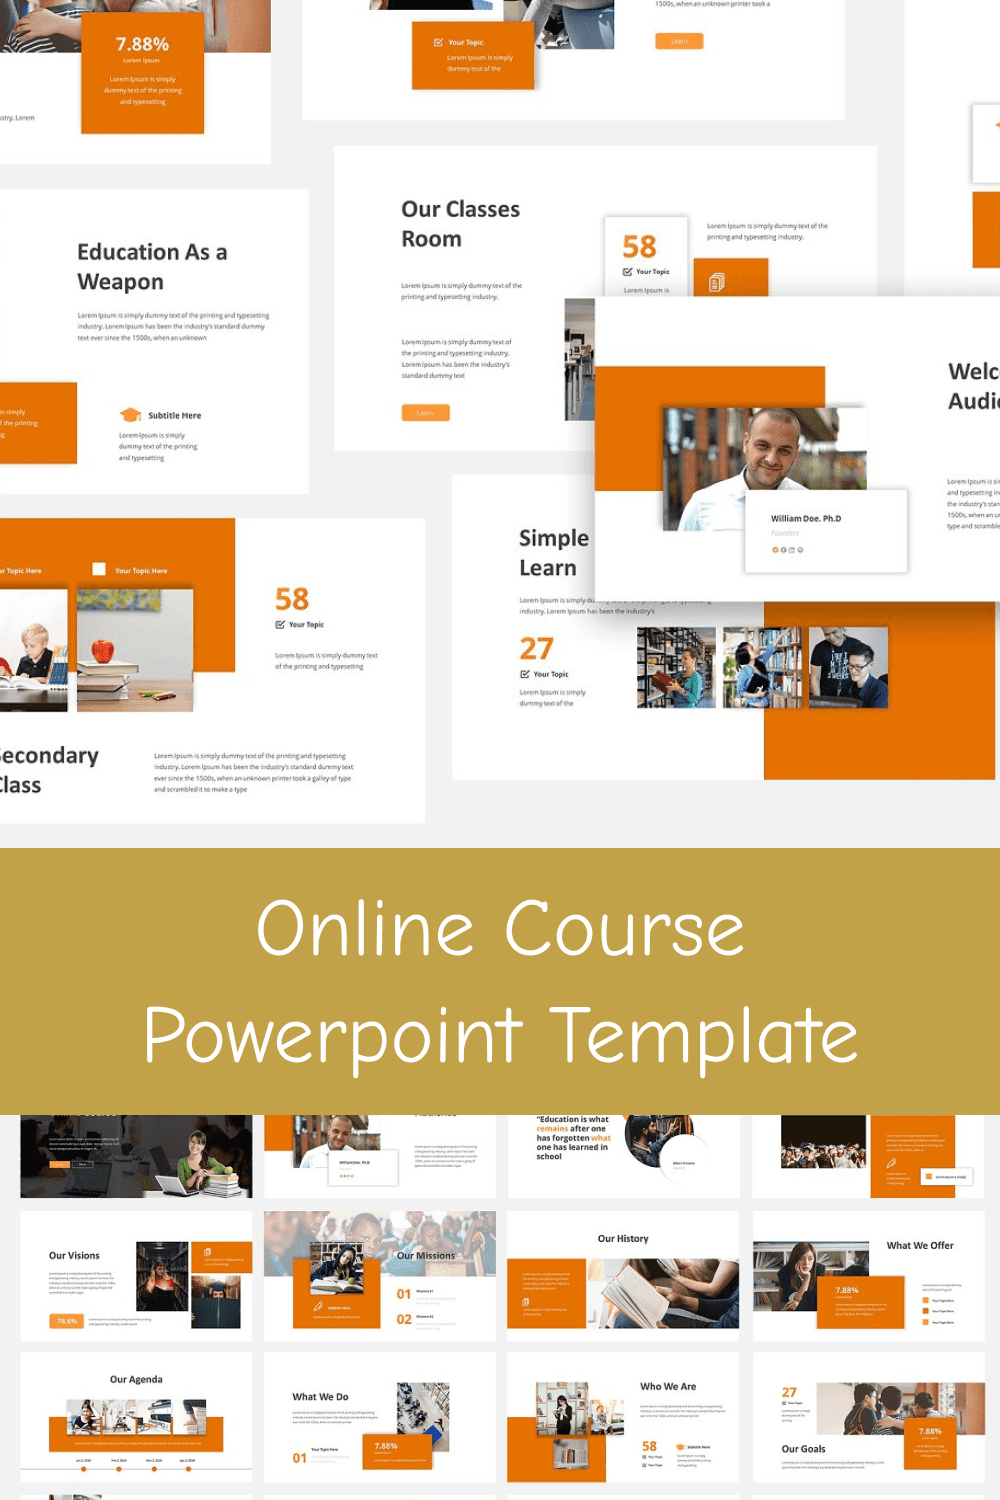 online course powerpoint template pinterest image.